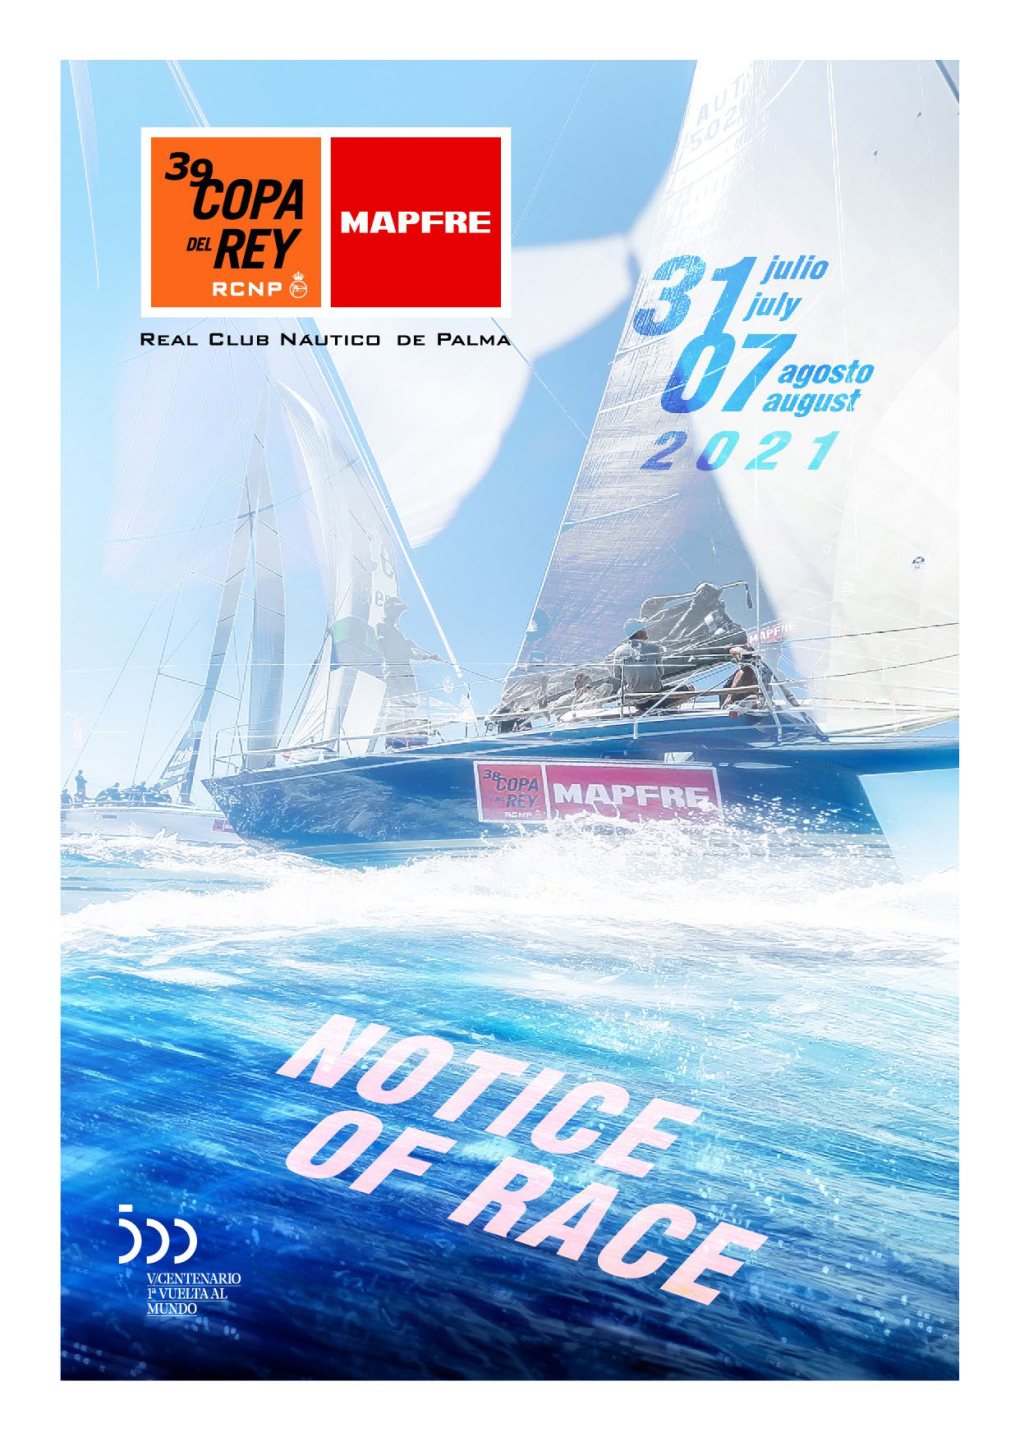 39 COPA DEL REY MAPFRE from 31 July to the 7 August, 2021 NOTICE of RACE